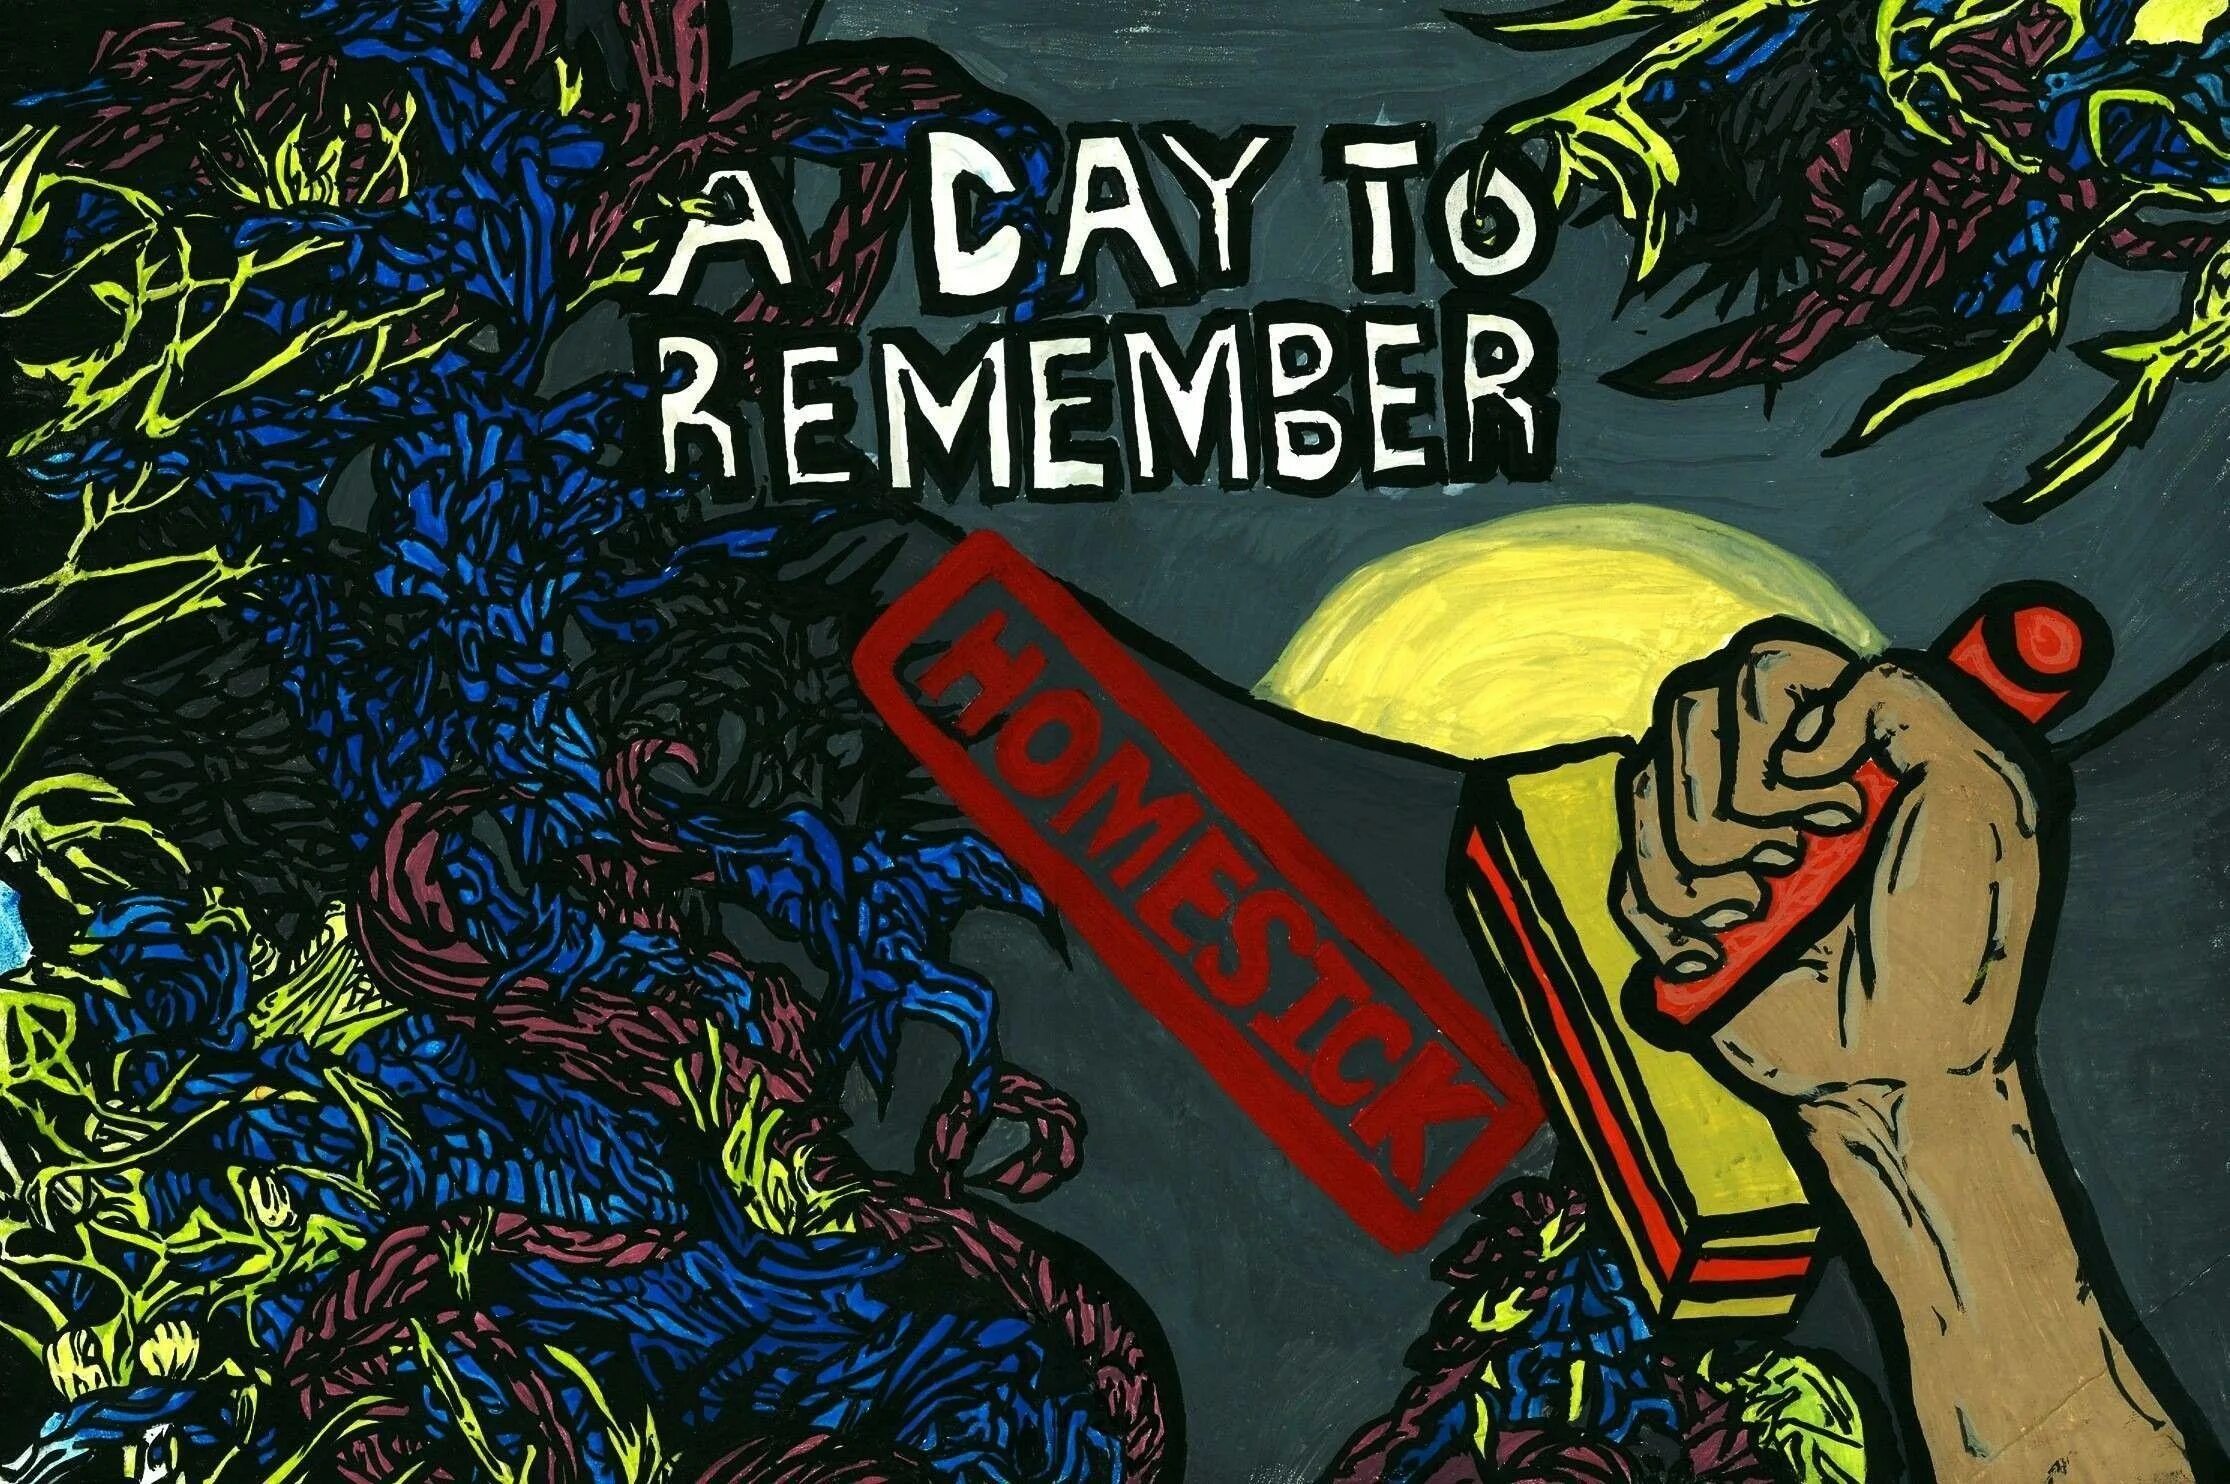 A Day to remember. A Day to remember логотип. Группа a Day to remember. A Day to remember обложка обои. The day we remember